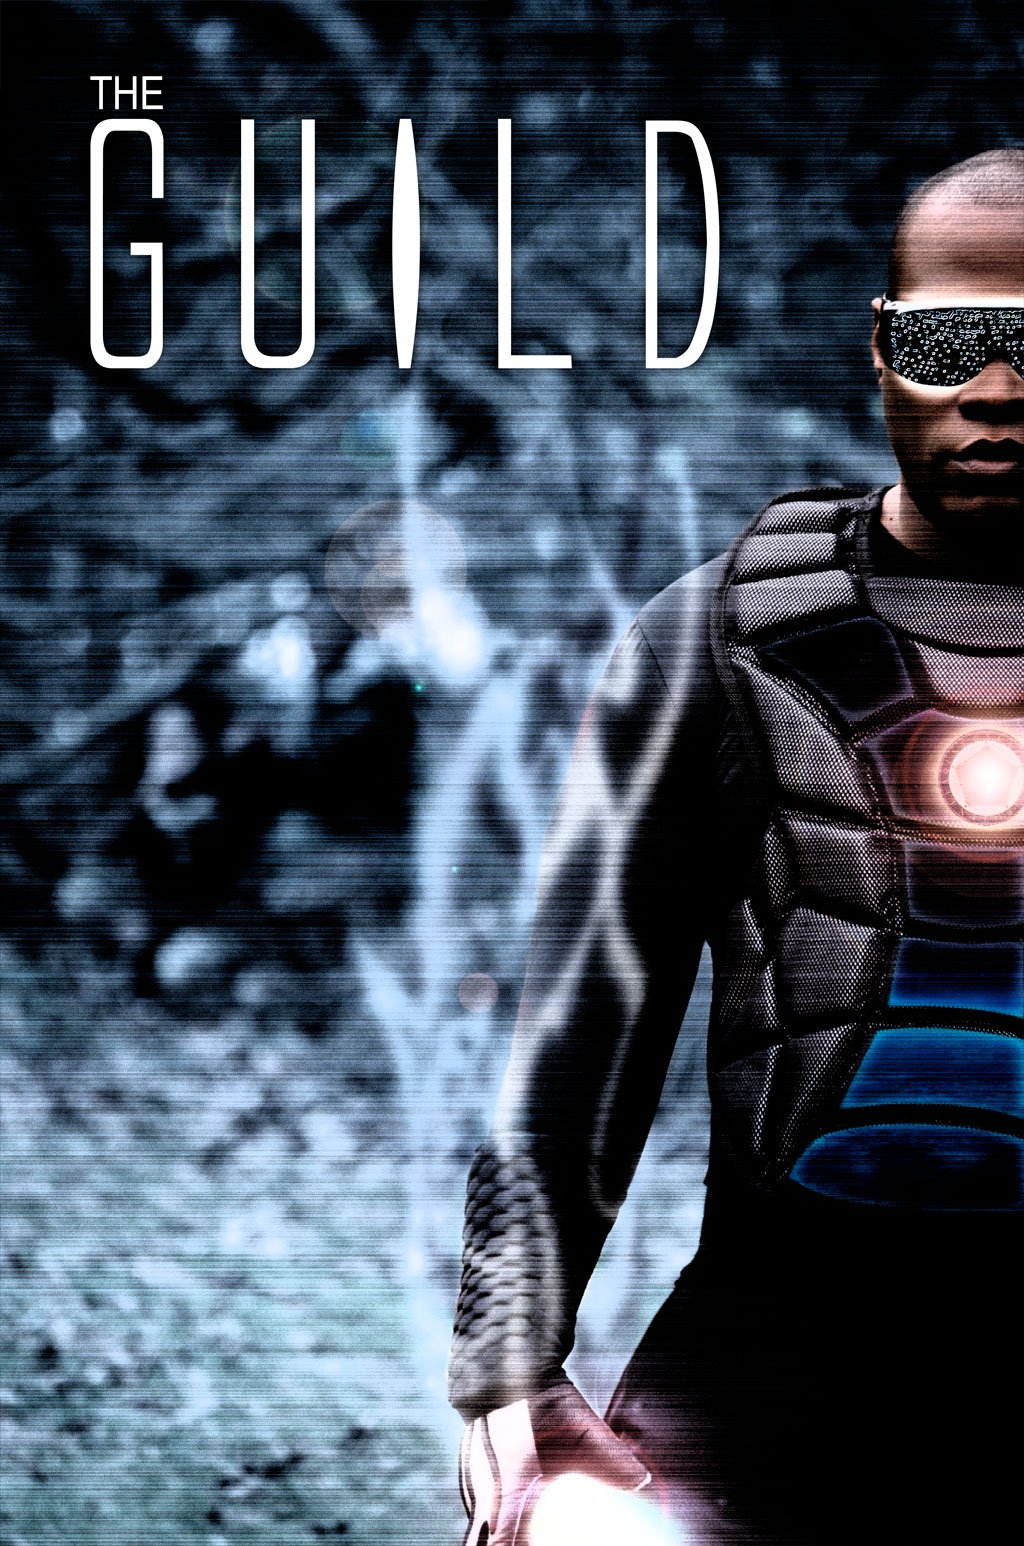 Me as the poster, and starring in the SCI-FI Action thriller, 